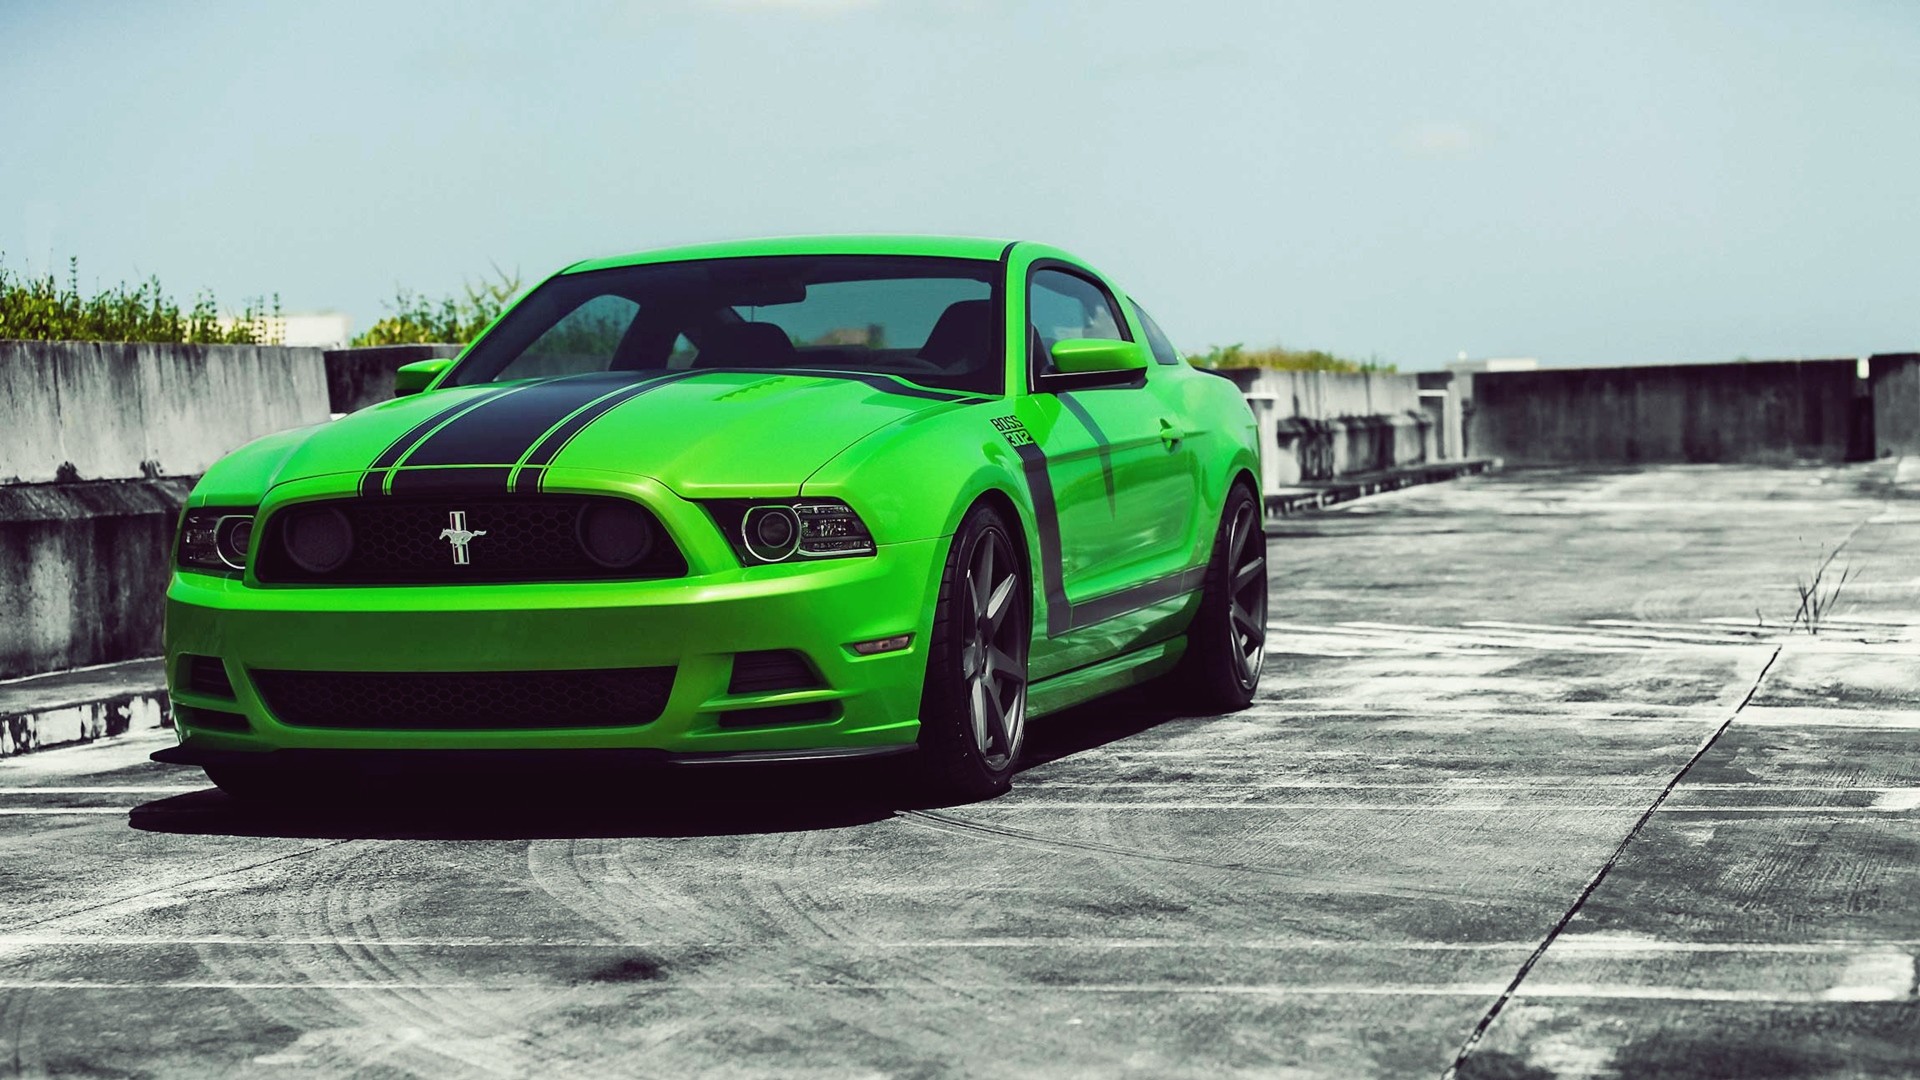 Ford Mustang Boss 302 2015 - image #131